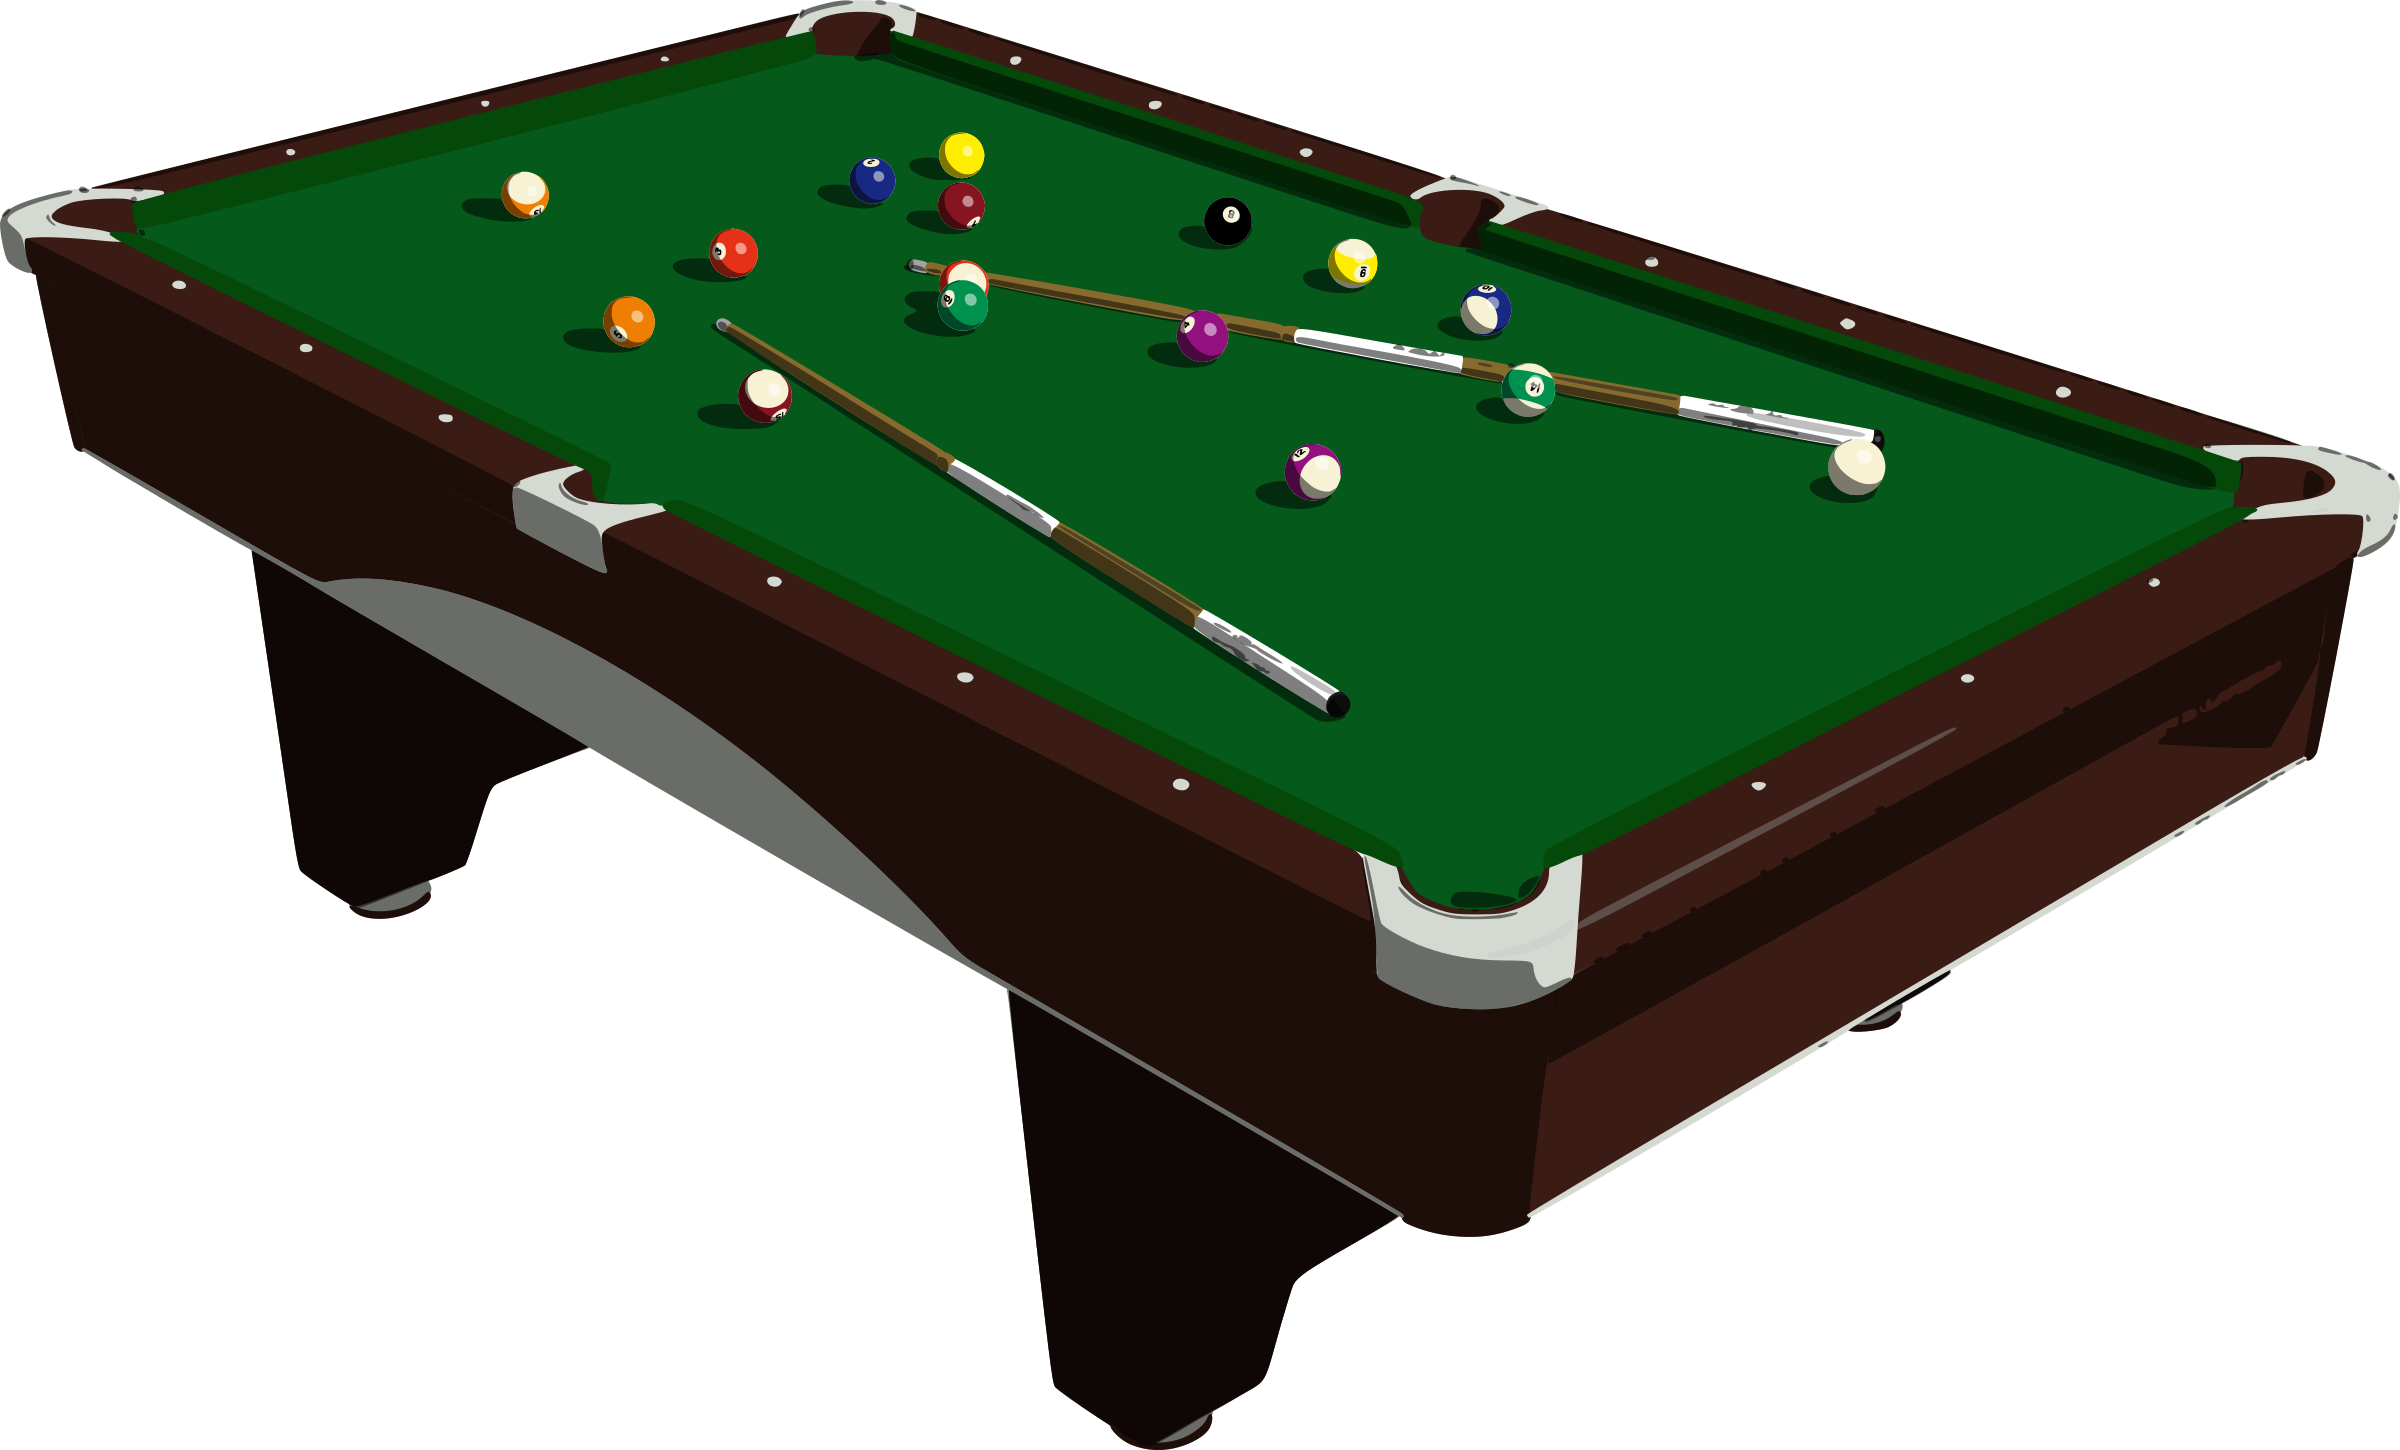 A Pool Table With Balls And Sticks On It